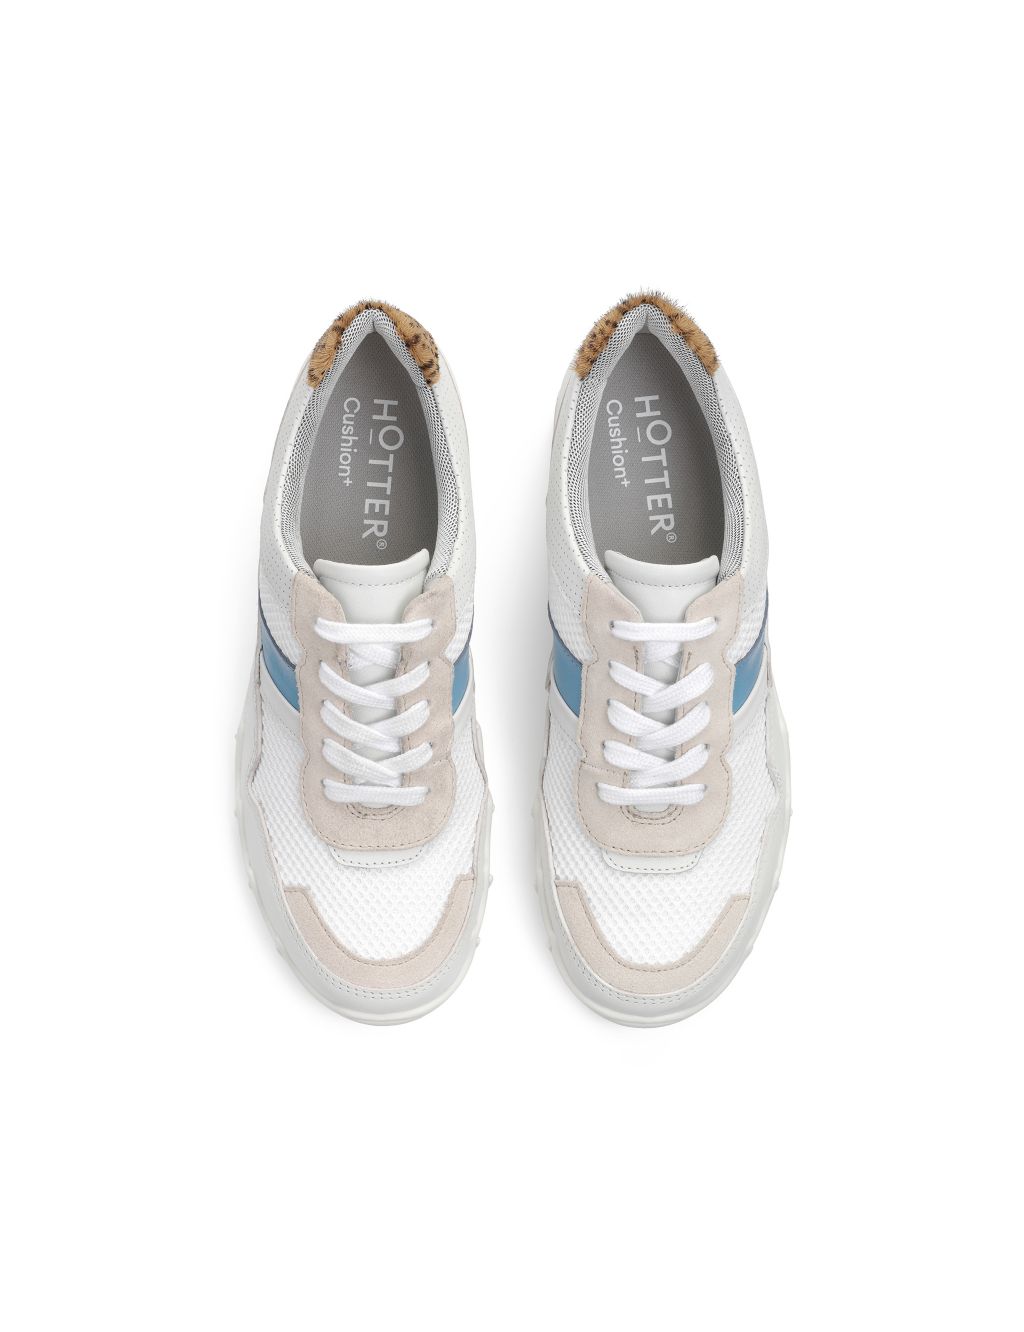 Leona Suede Lace Up Trainers image 2